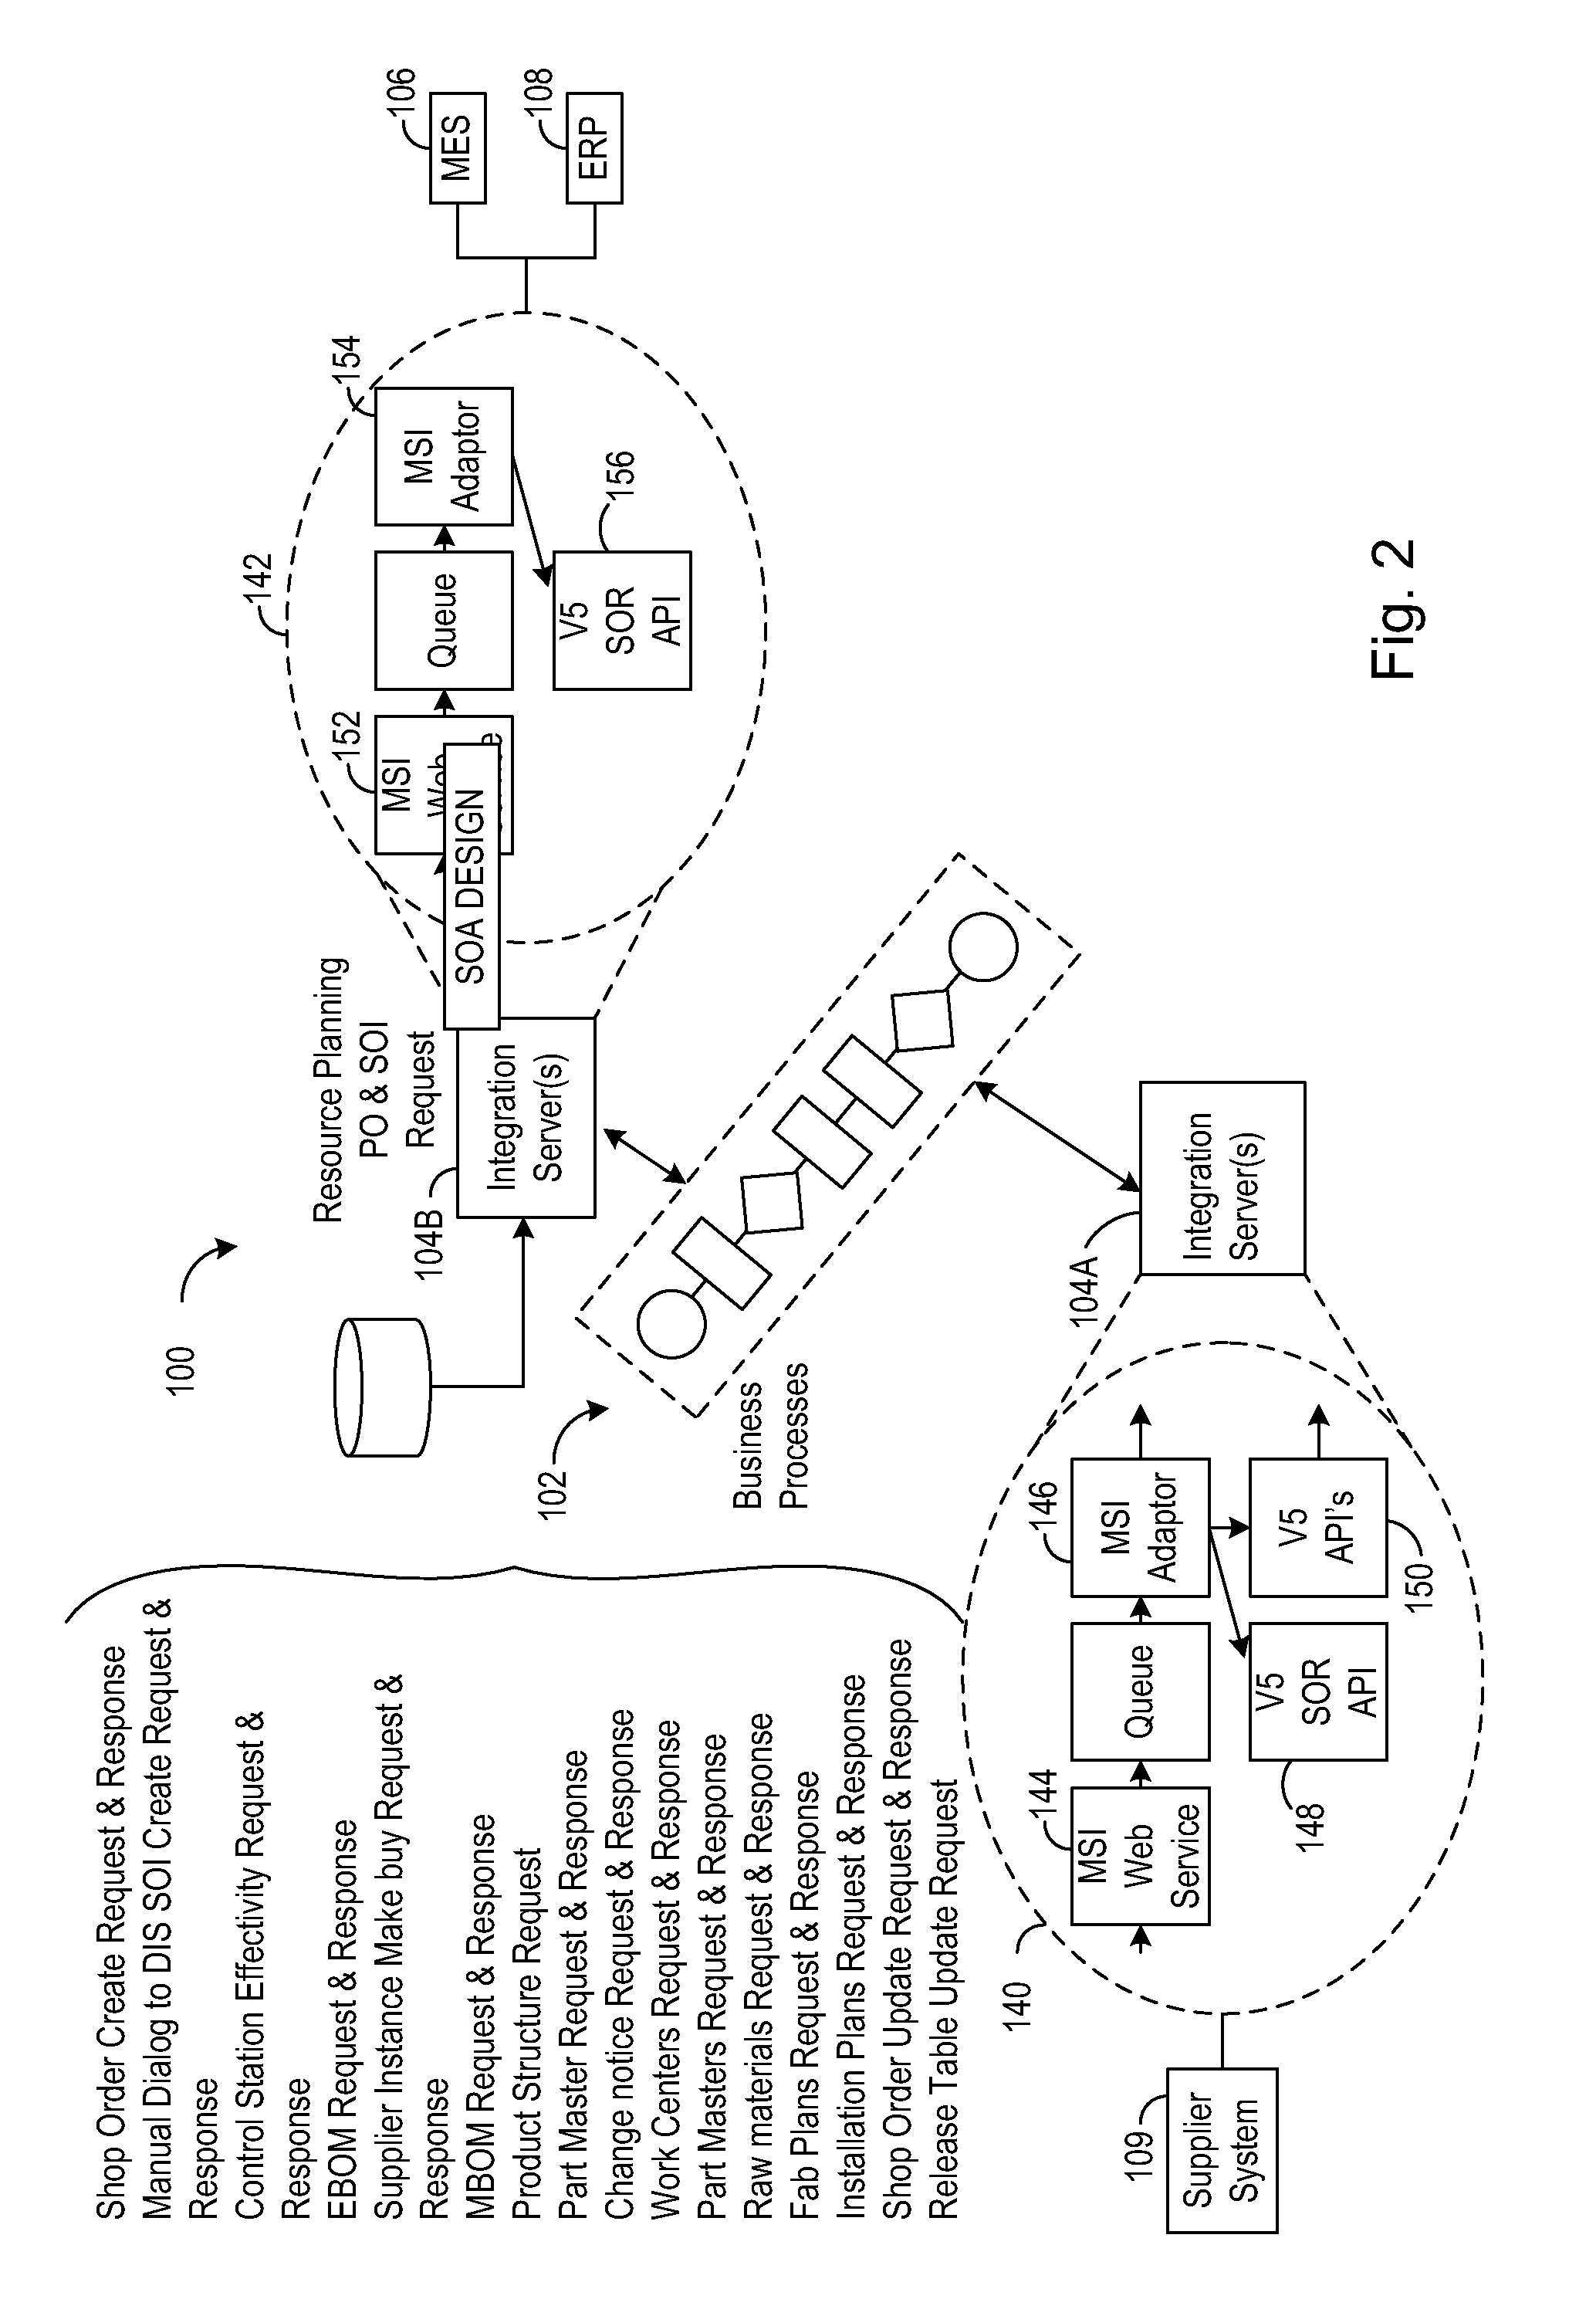 Methods and systems for distributing computer modeled product design and manufacture data to peripheral systems